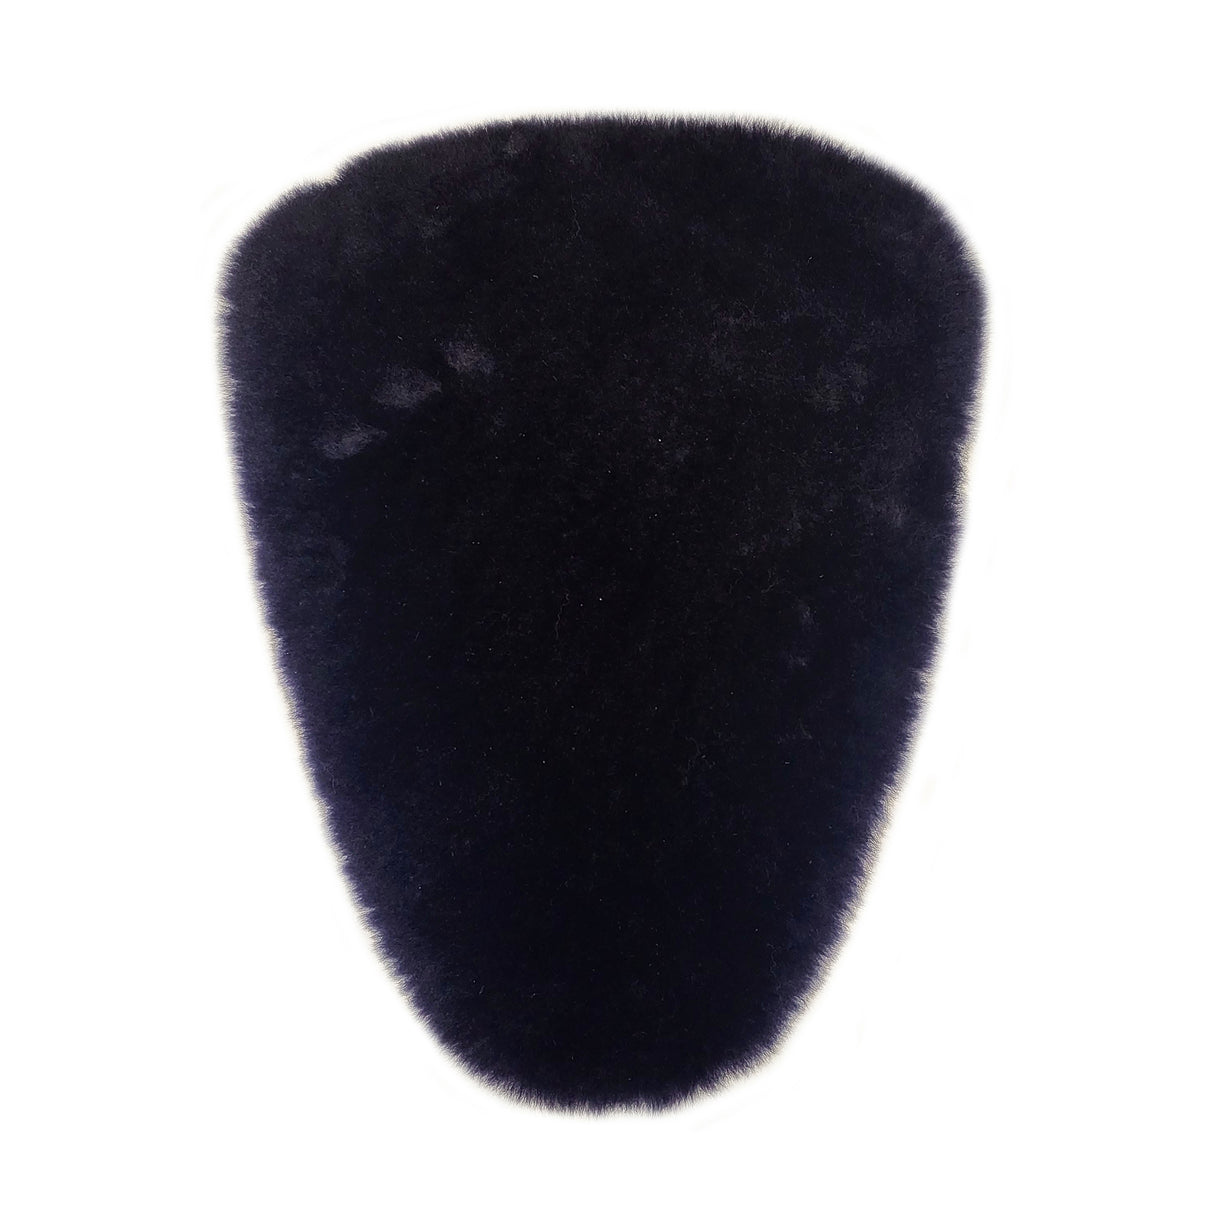 'The Oblique' Small Seat Motorcycle Short Wool Sheepskin Seat Pad